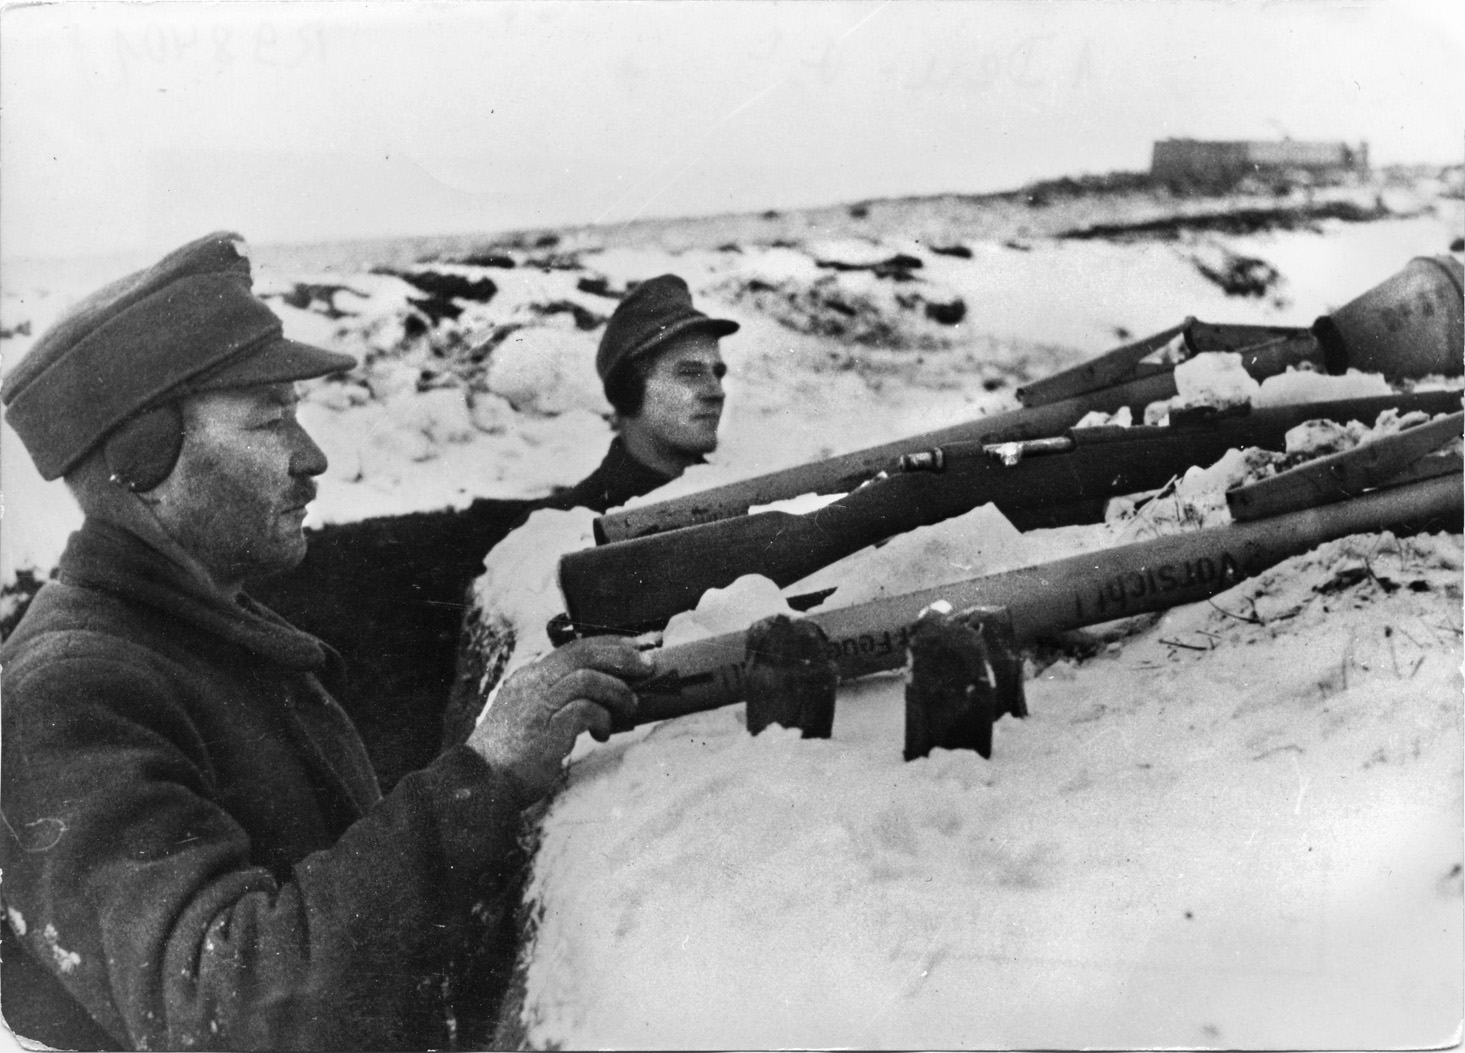 Awaiting the Red Army attack that will surely come, members of a German Volkssturm unit man positions along a trenchline on the  outskirts of Königsberg on January 20, 1945.  